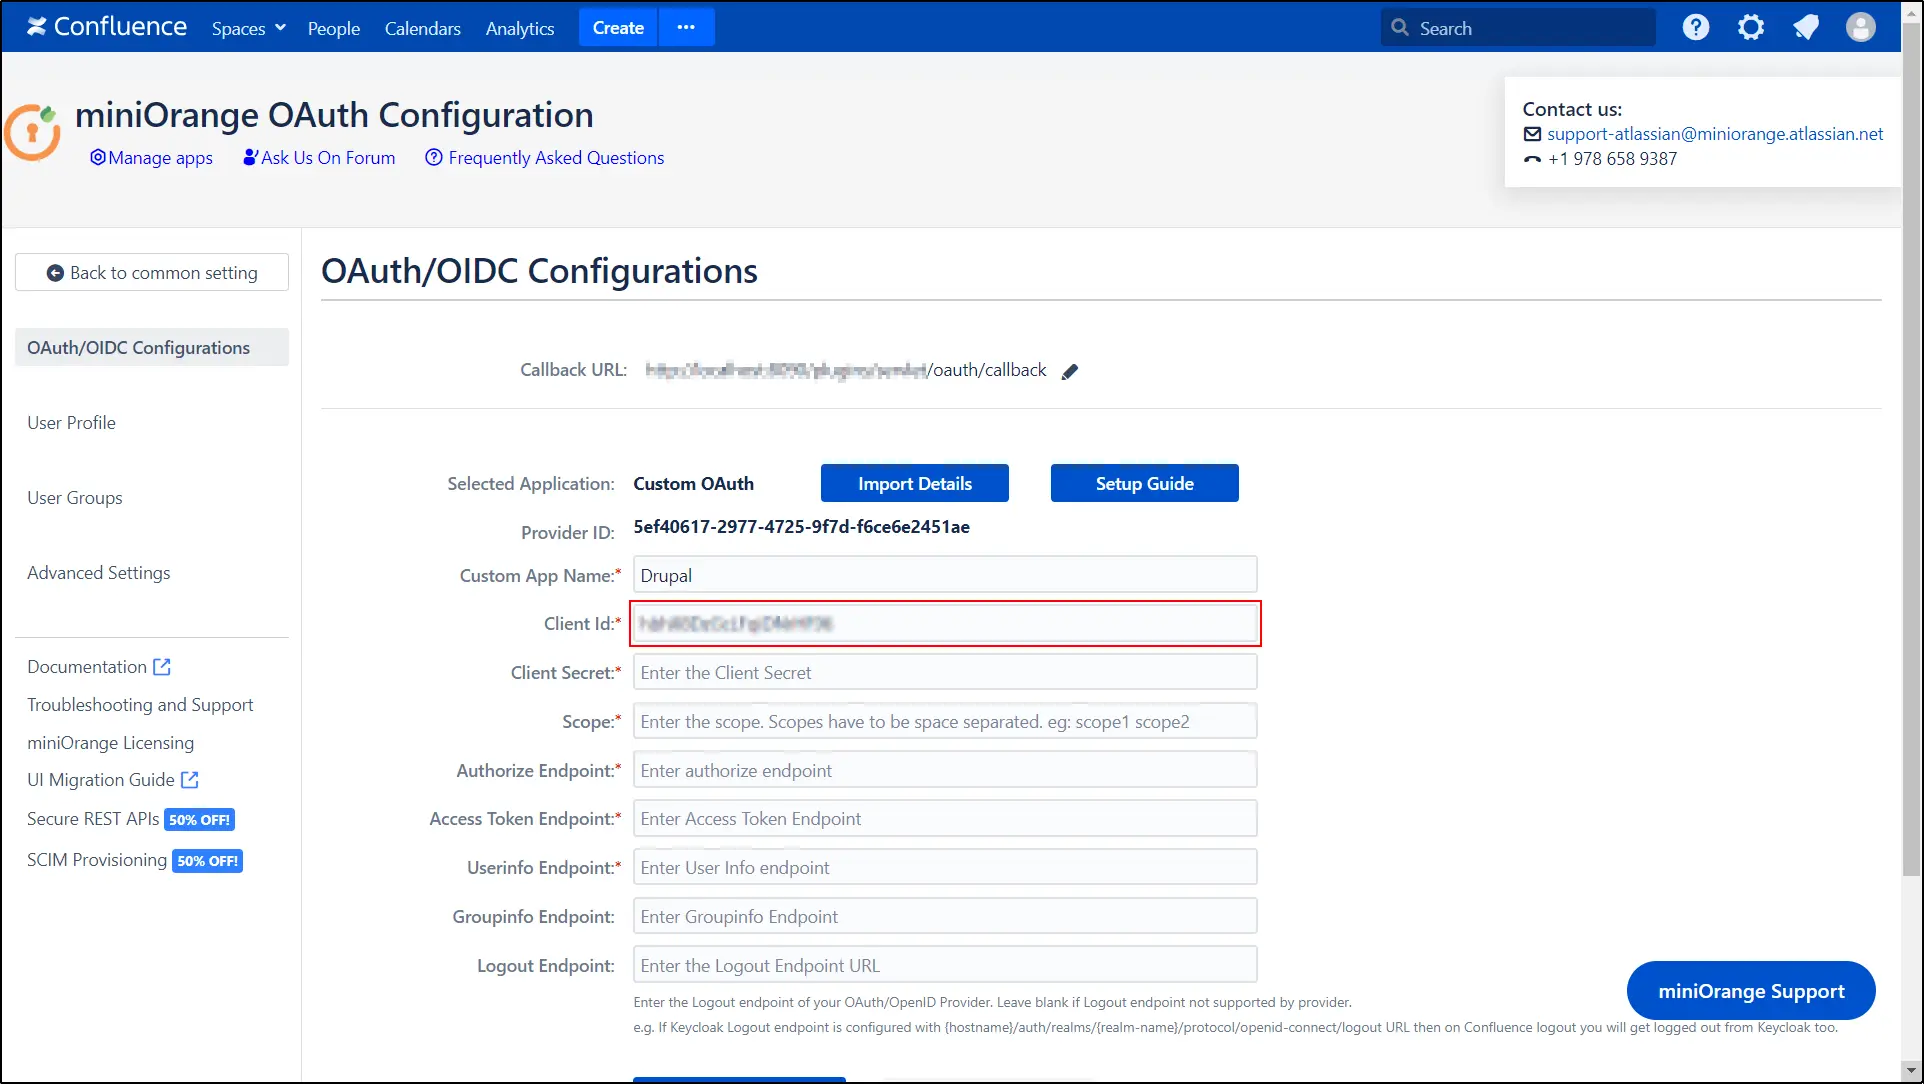  Integrating Confluence with Drupal OAuth/OIDC Provider - Paste client id into client id field in Confluence